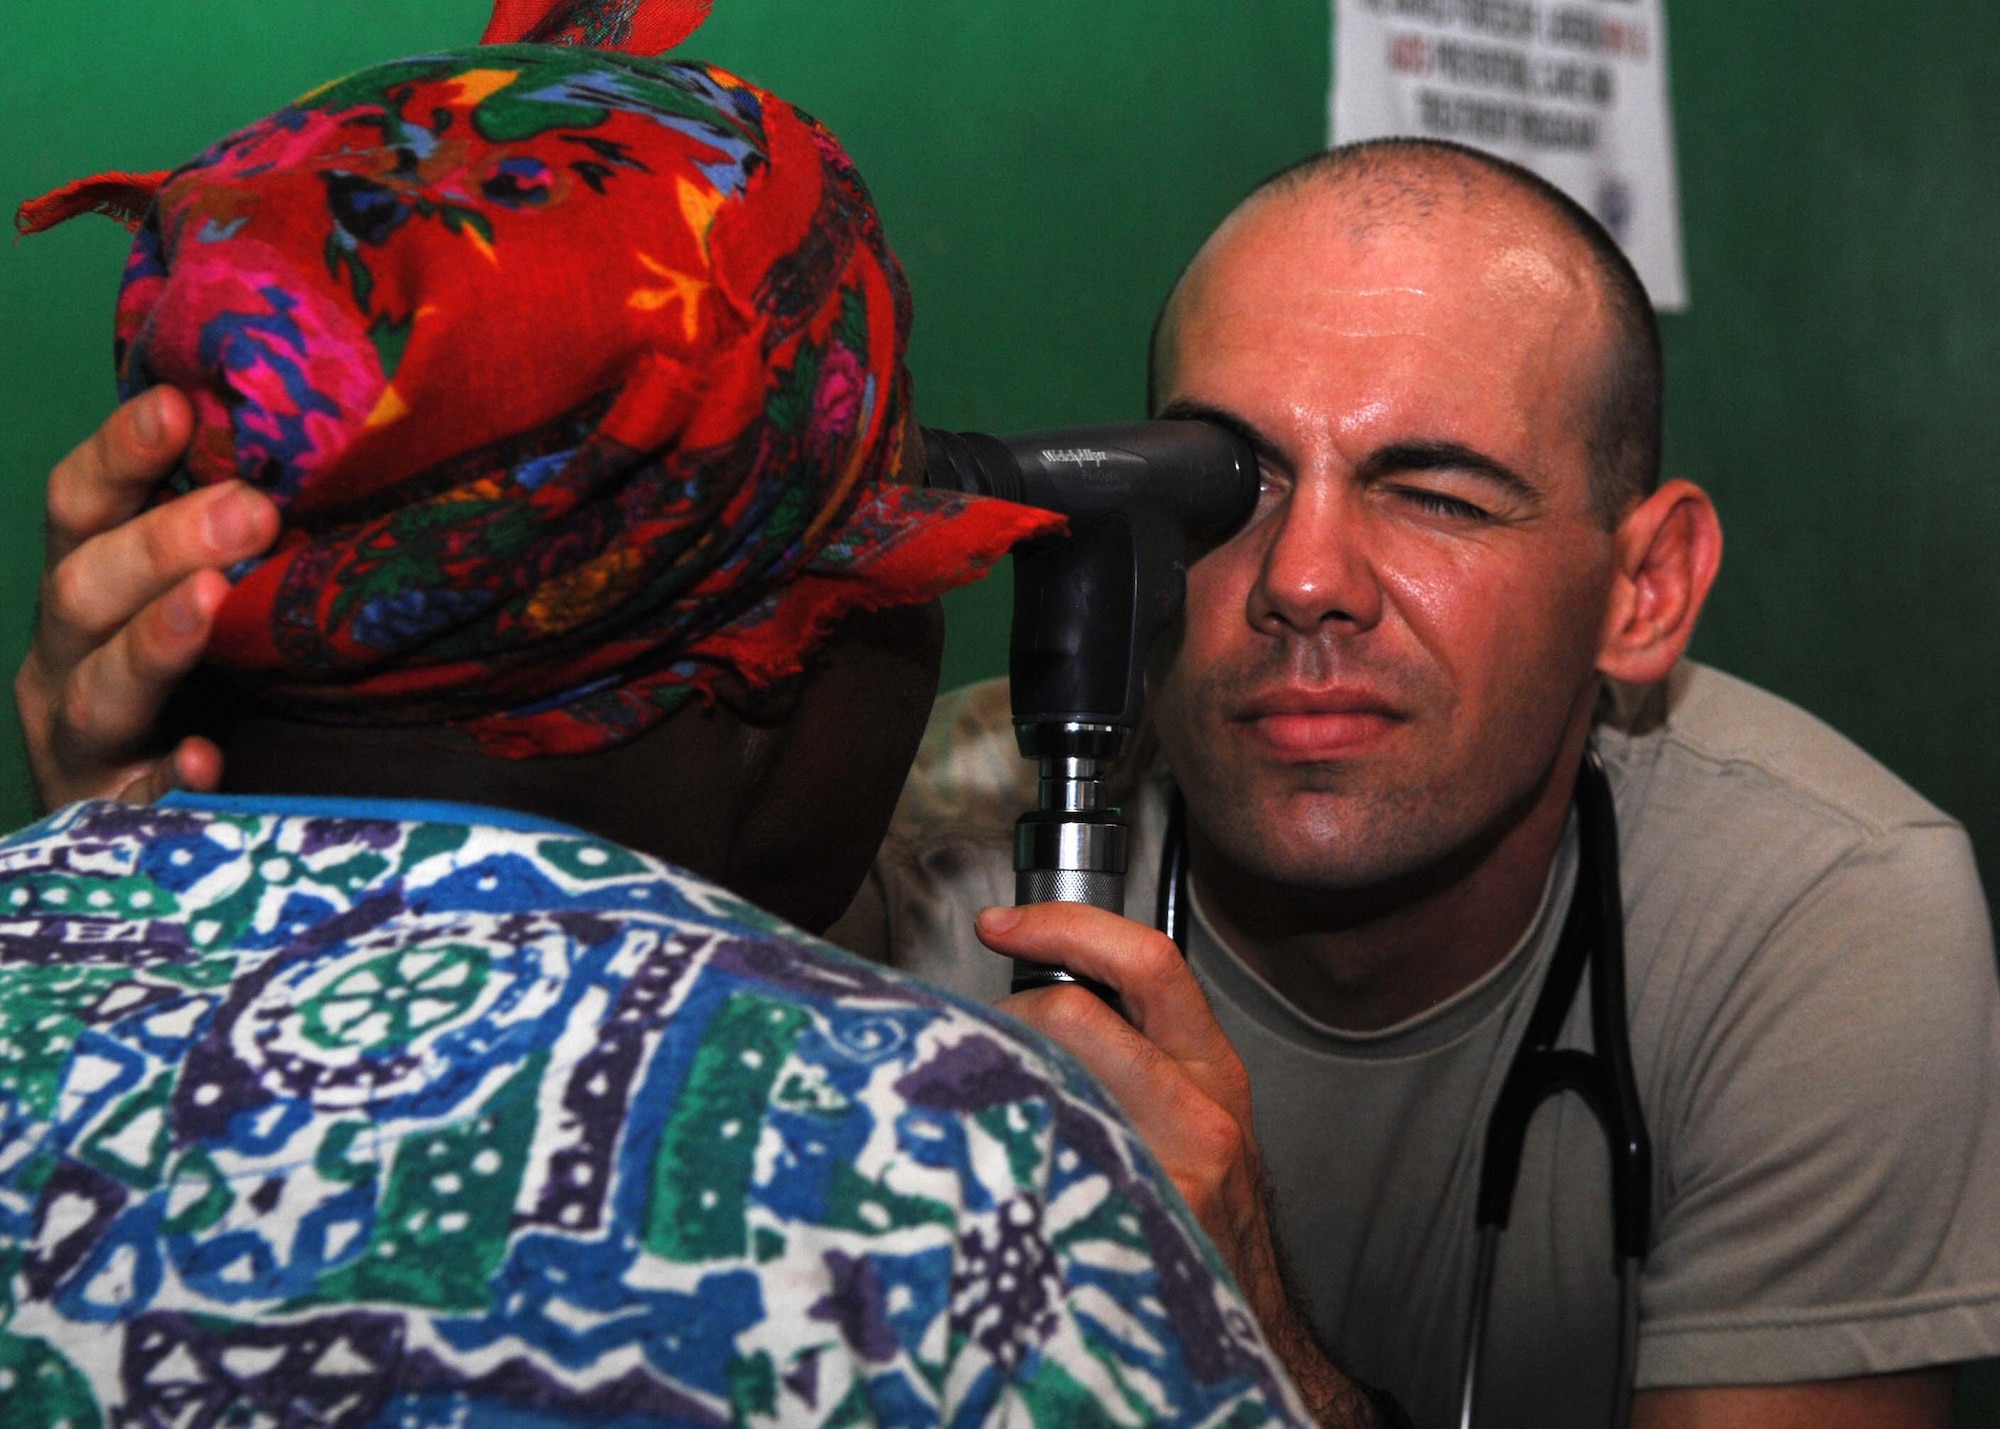 Maj. (Dr.) Joshua Latham gives a patient a medical evaluation during a medical outreach visit July 2, 2013, in Gondor Town, Liberia. The Armed Forces of Liberia led a 14-person medical outreach team including doctors, nurses and a support staff to three villages deep in the jungles of Grand Cape Mount County from July 1 - 4. The medical outreach mission was a first for the AFL which was restructured in 2005 following 15 years of civil war. Latham is an AFL medical mentor deployed with Operation Onward Liberty. (U.S. Air Force photo/Master Sgt. Brian Bahret)